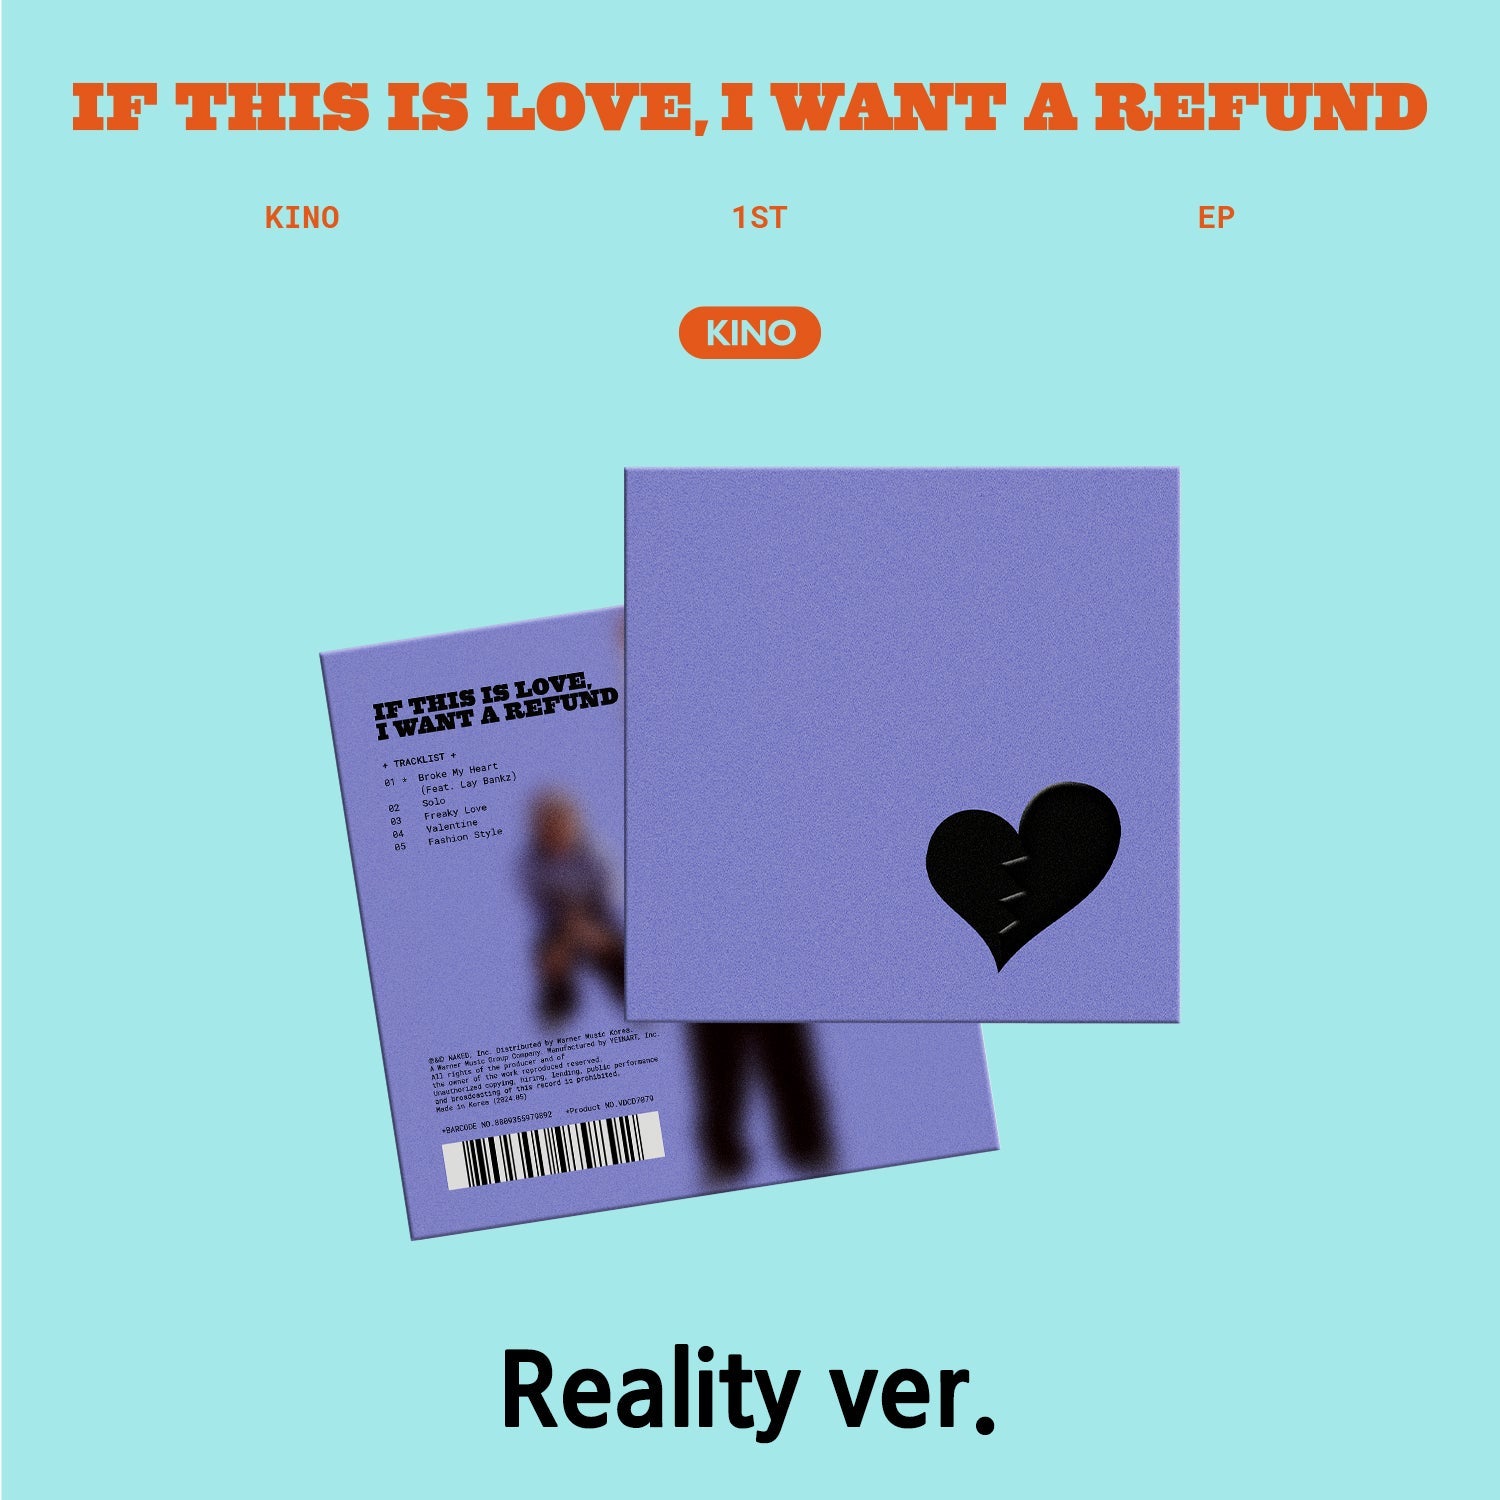 KINO - [If this is love, I want a refund] Reality ver. Kpop Album - Kpop Wholesale | Seoufly